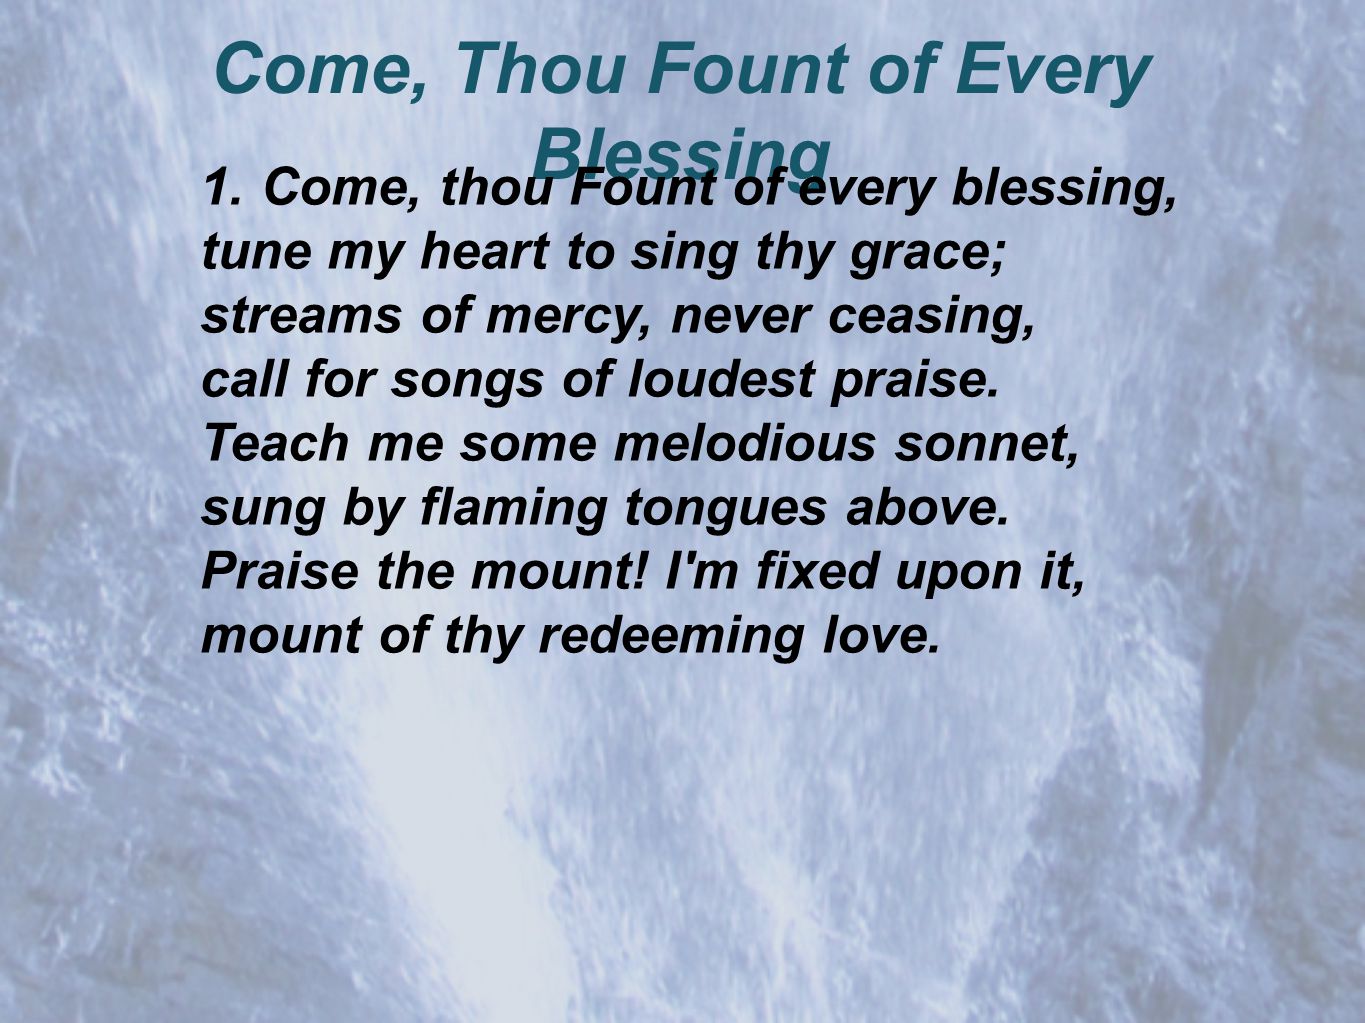 Come, Thou Fount of Every Blessing 1.Come, thou Fount of every blessing, tune my heart to sing thy grace; streams of mercy, never ceasing, call for songs of loudest praise.